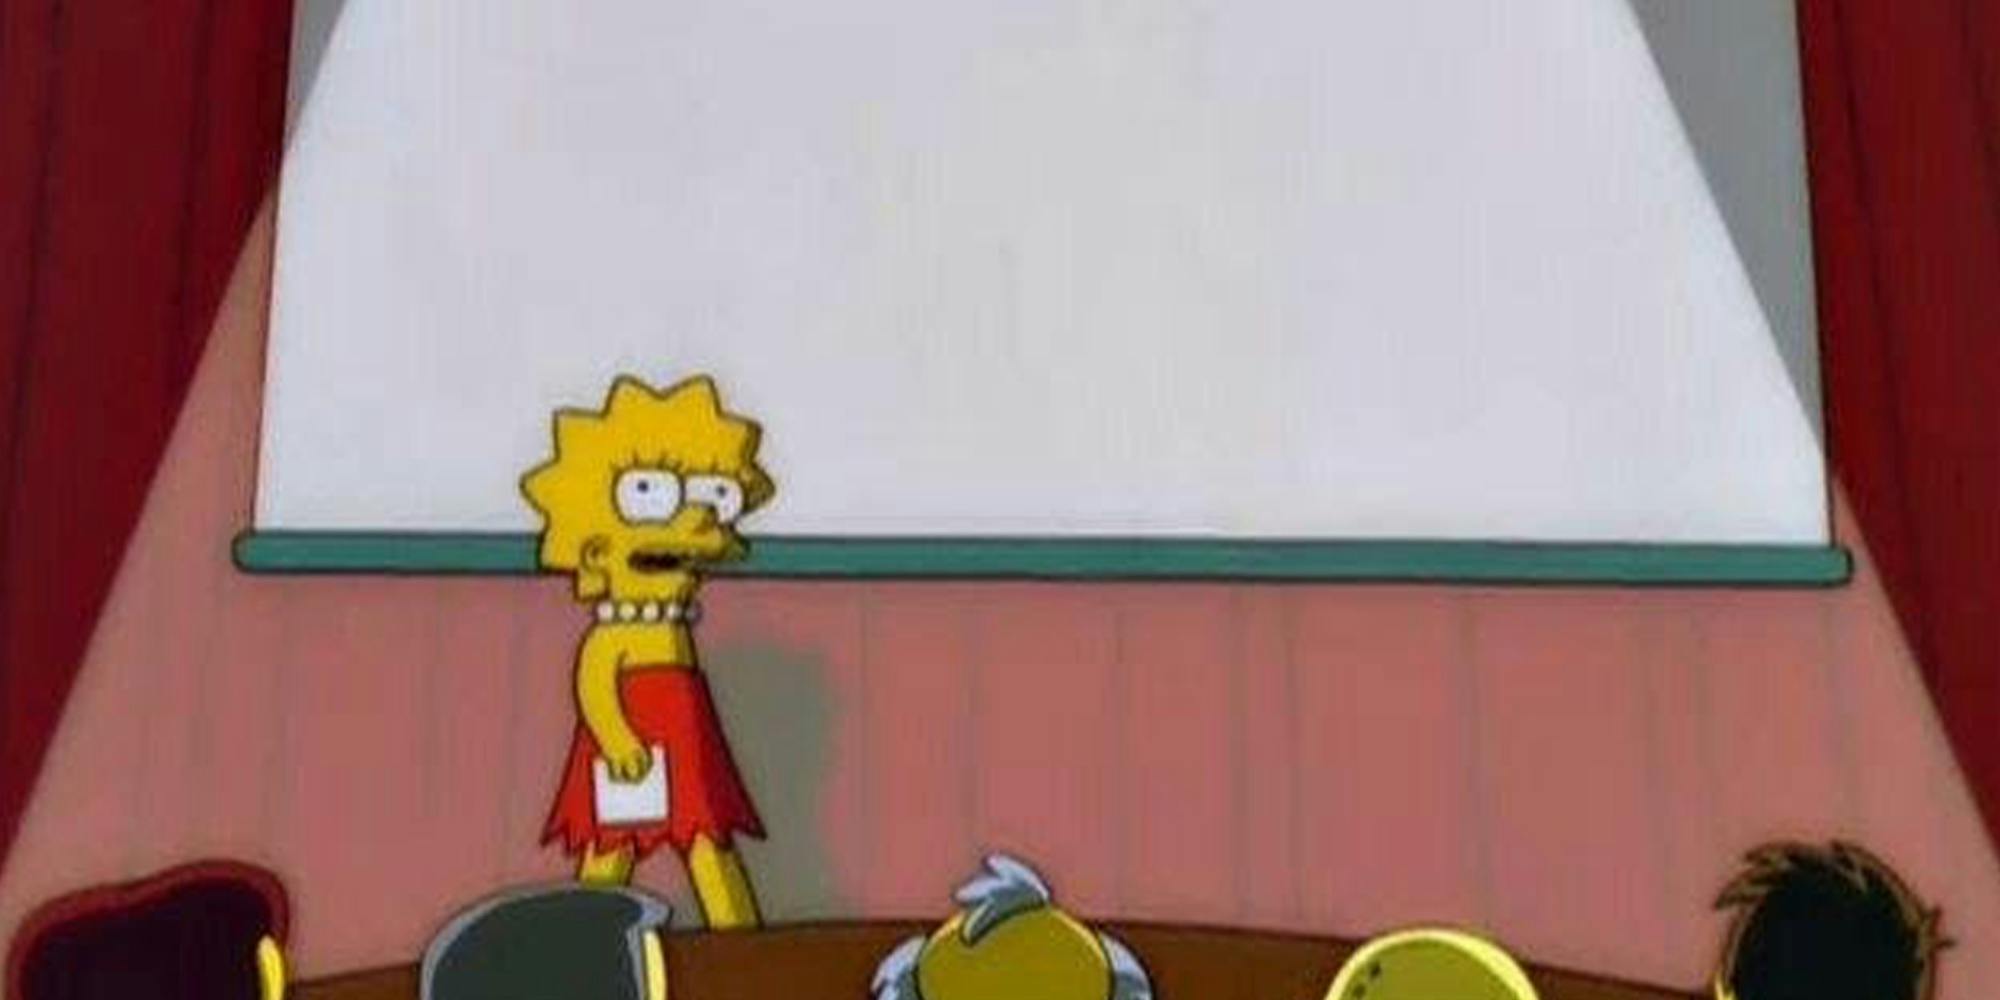 Why the Lisa Simpson presentation meme captured our attention